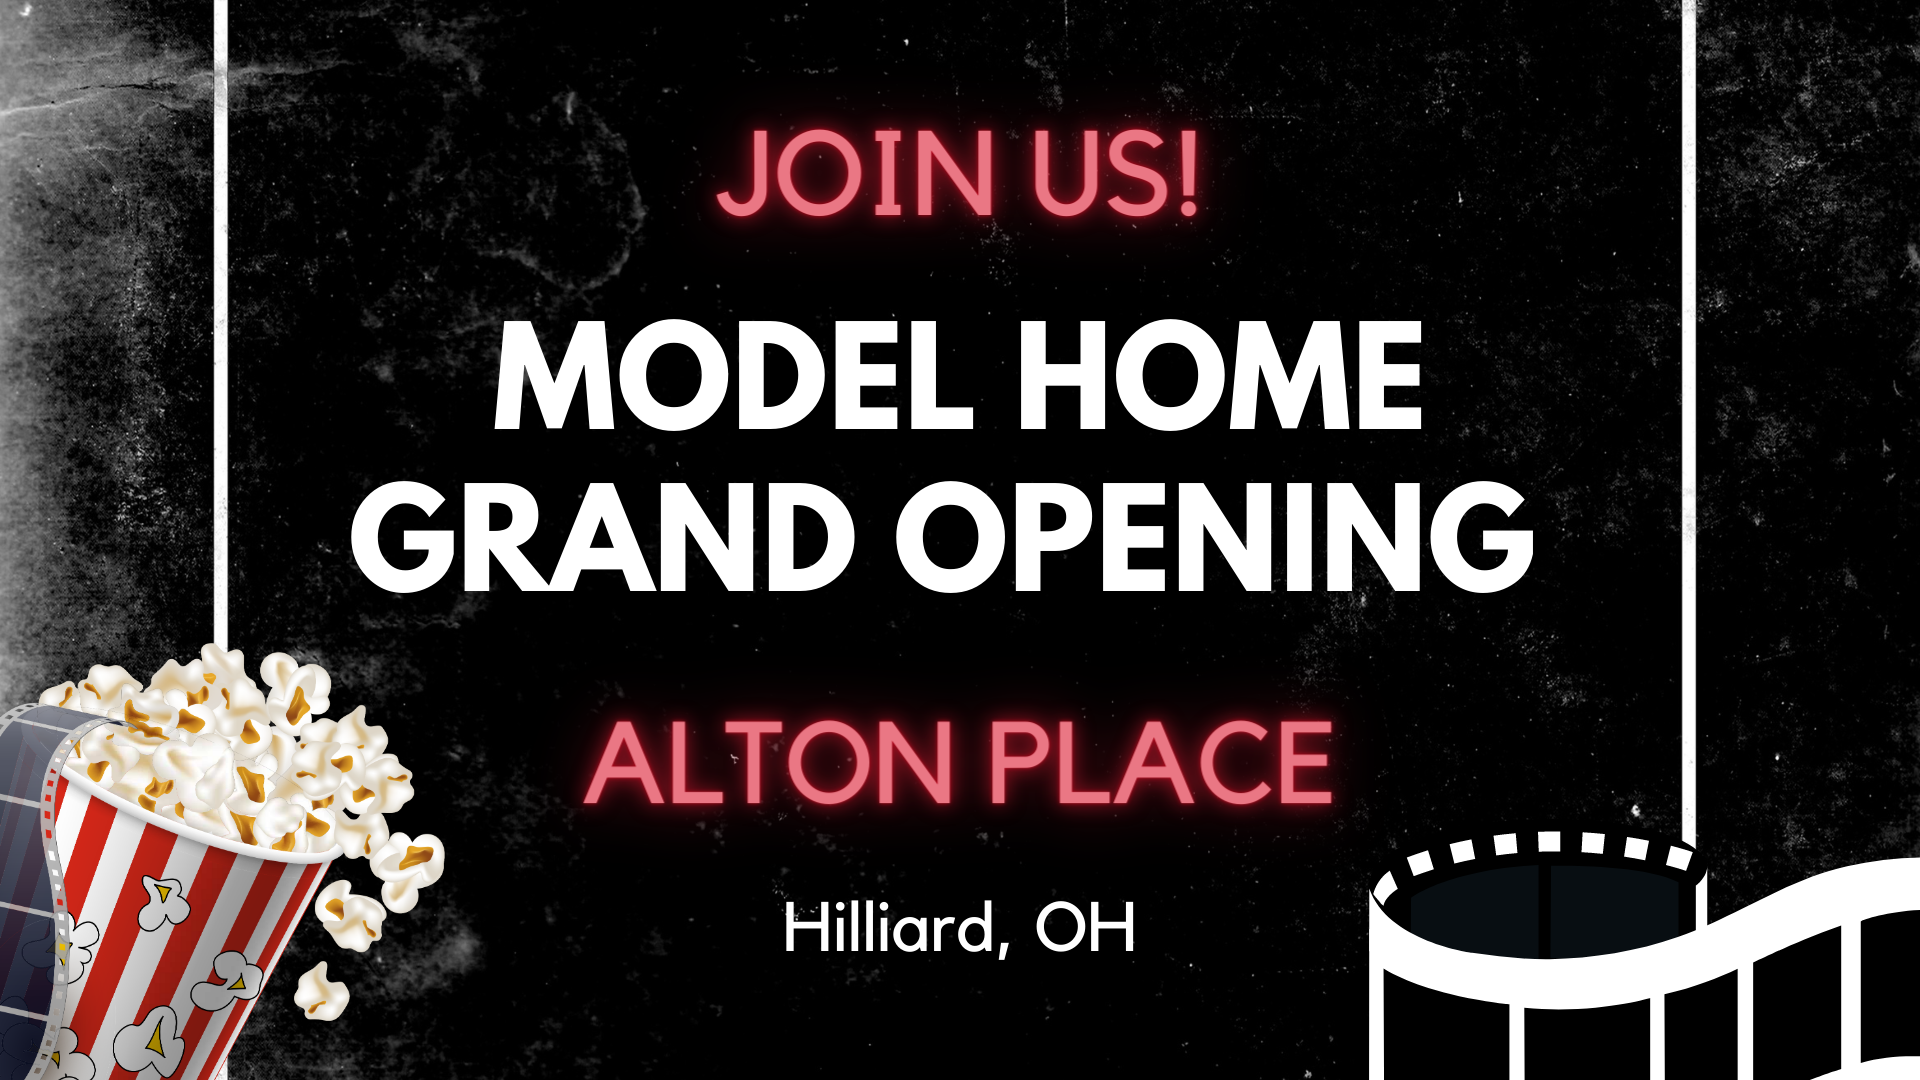 Model Grand Opening Event at Alton Place in Hilliard, OH!